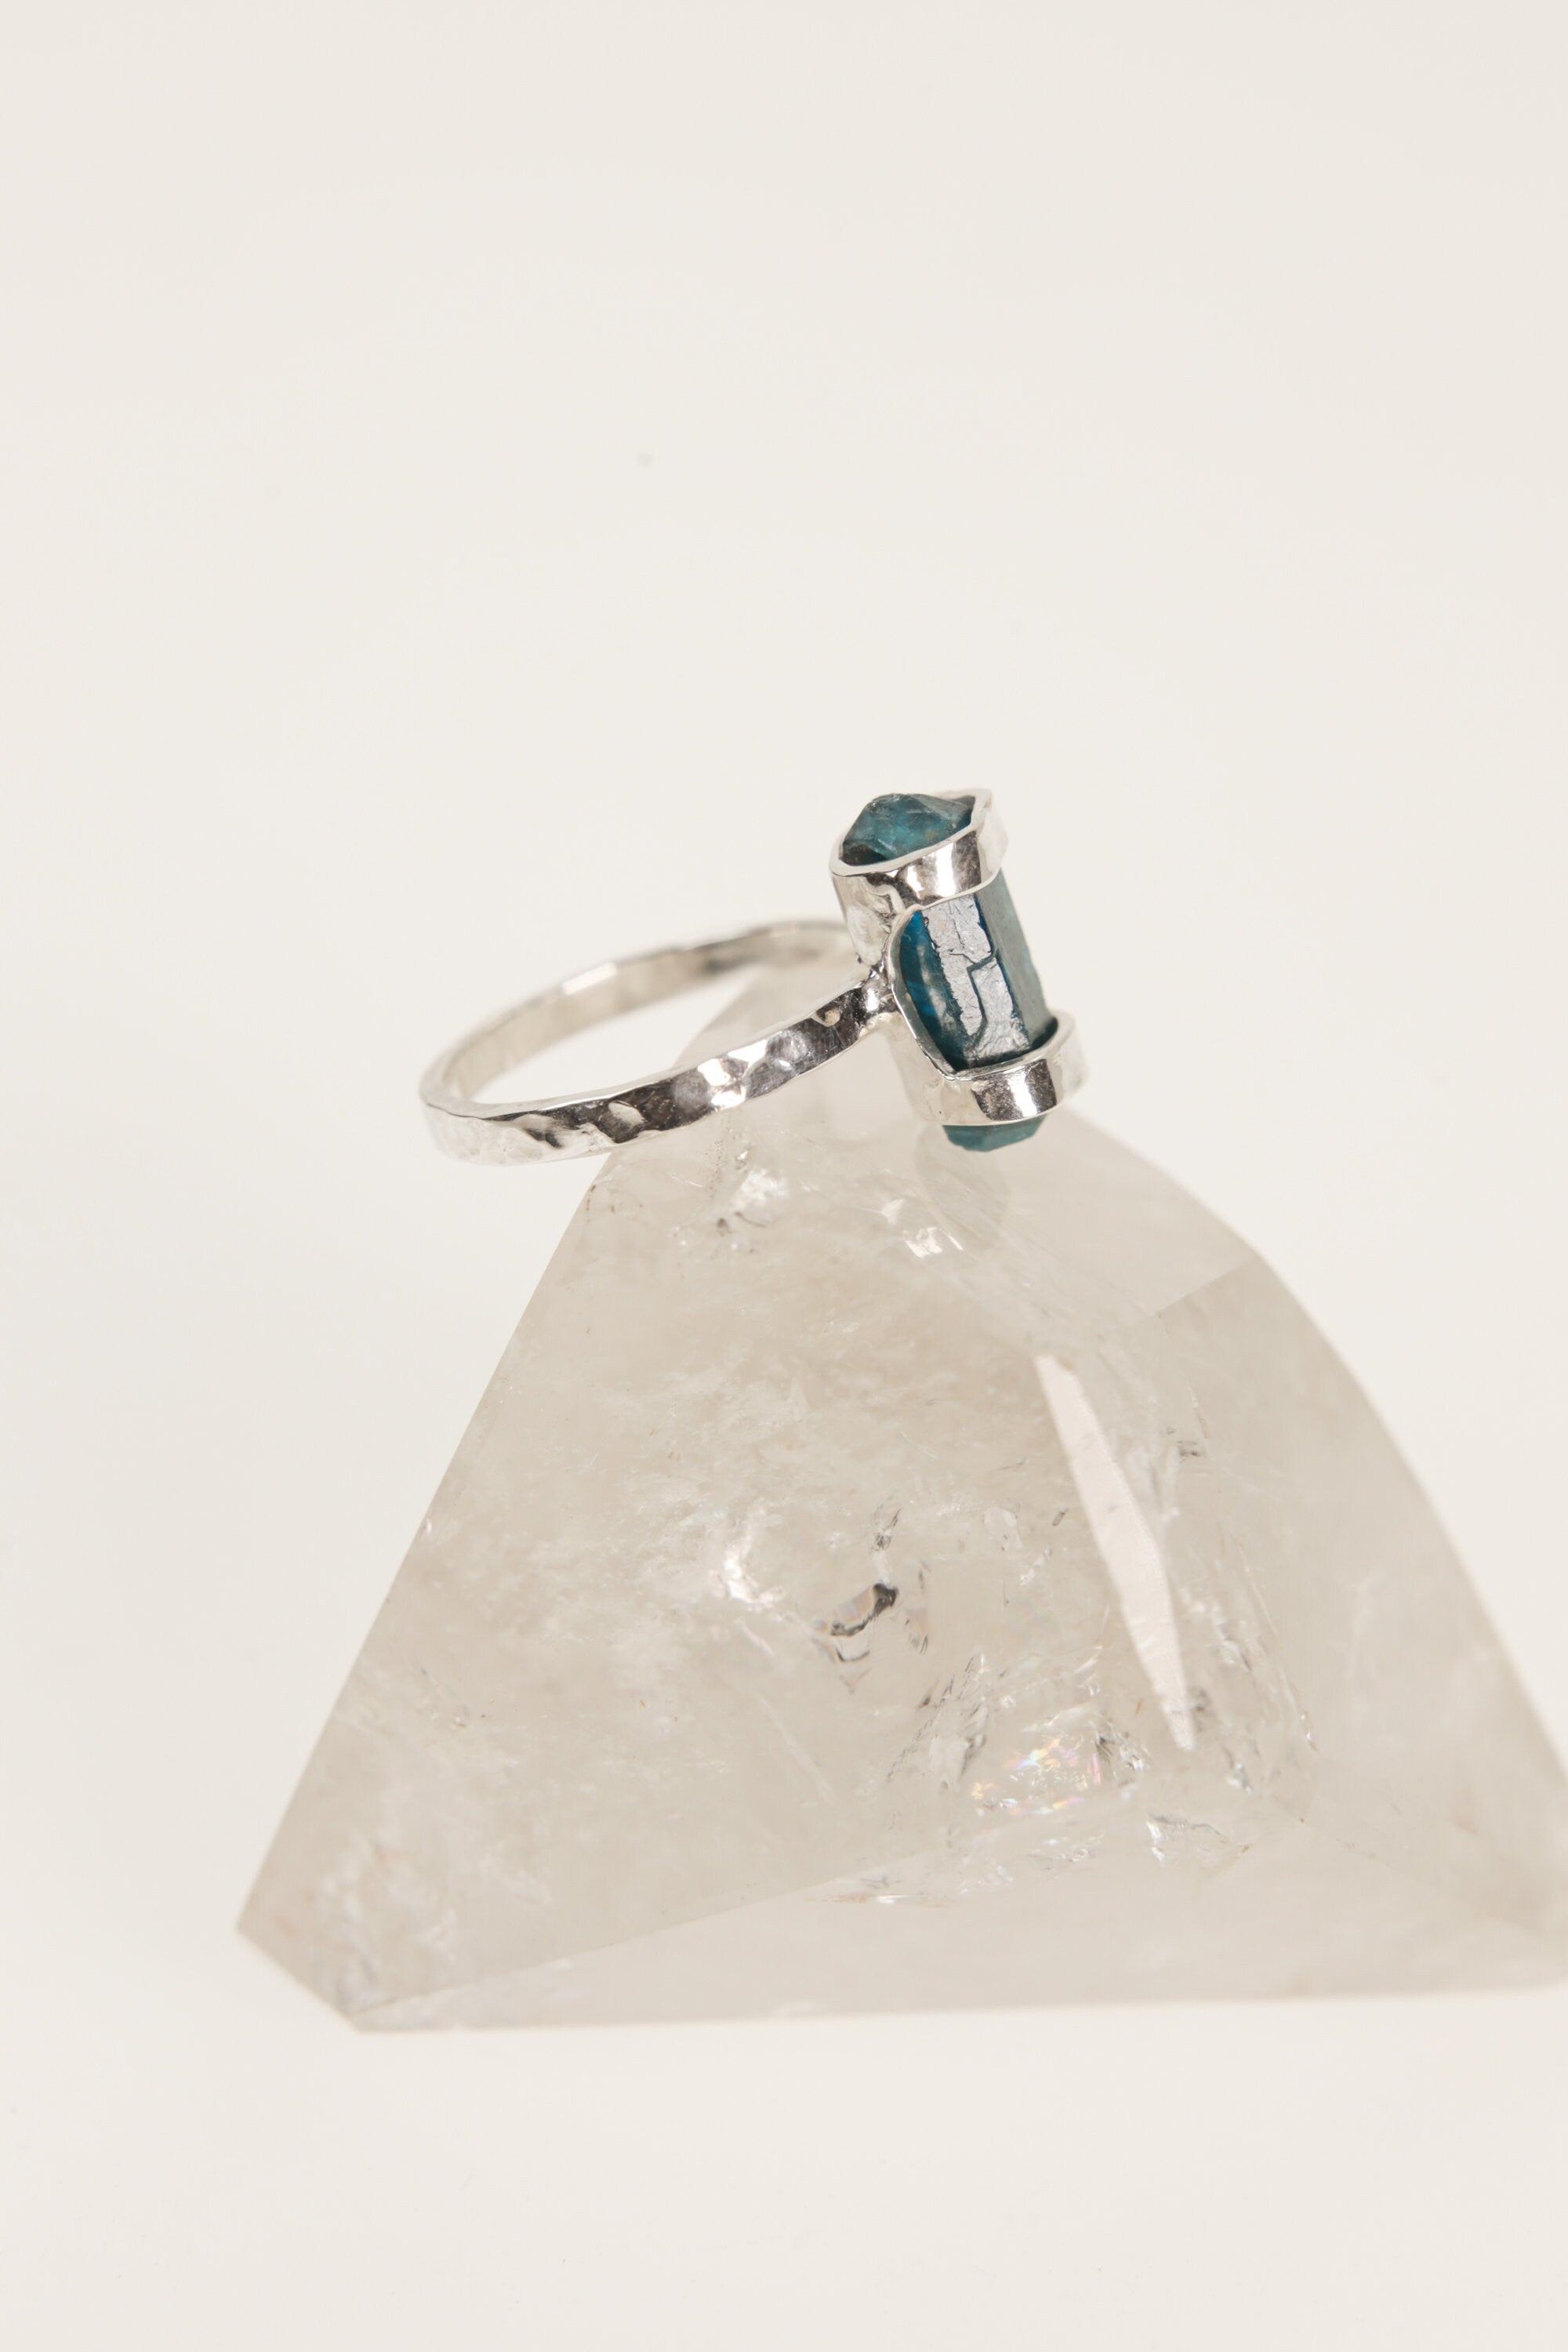 Celestial Blue Terminated Apatite Ring-Hammered & Shiny Finish - Sterling Silver Ring - Size 4 3/4 US